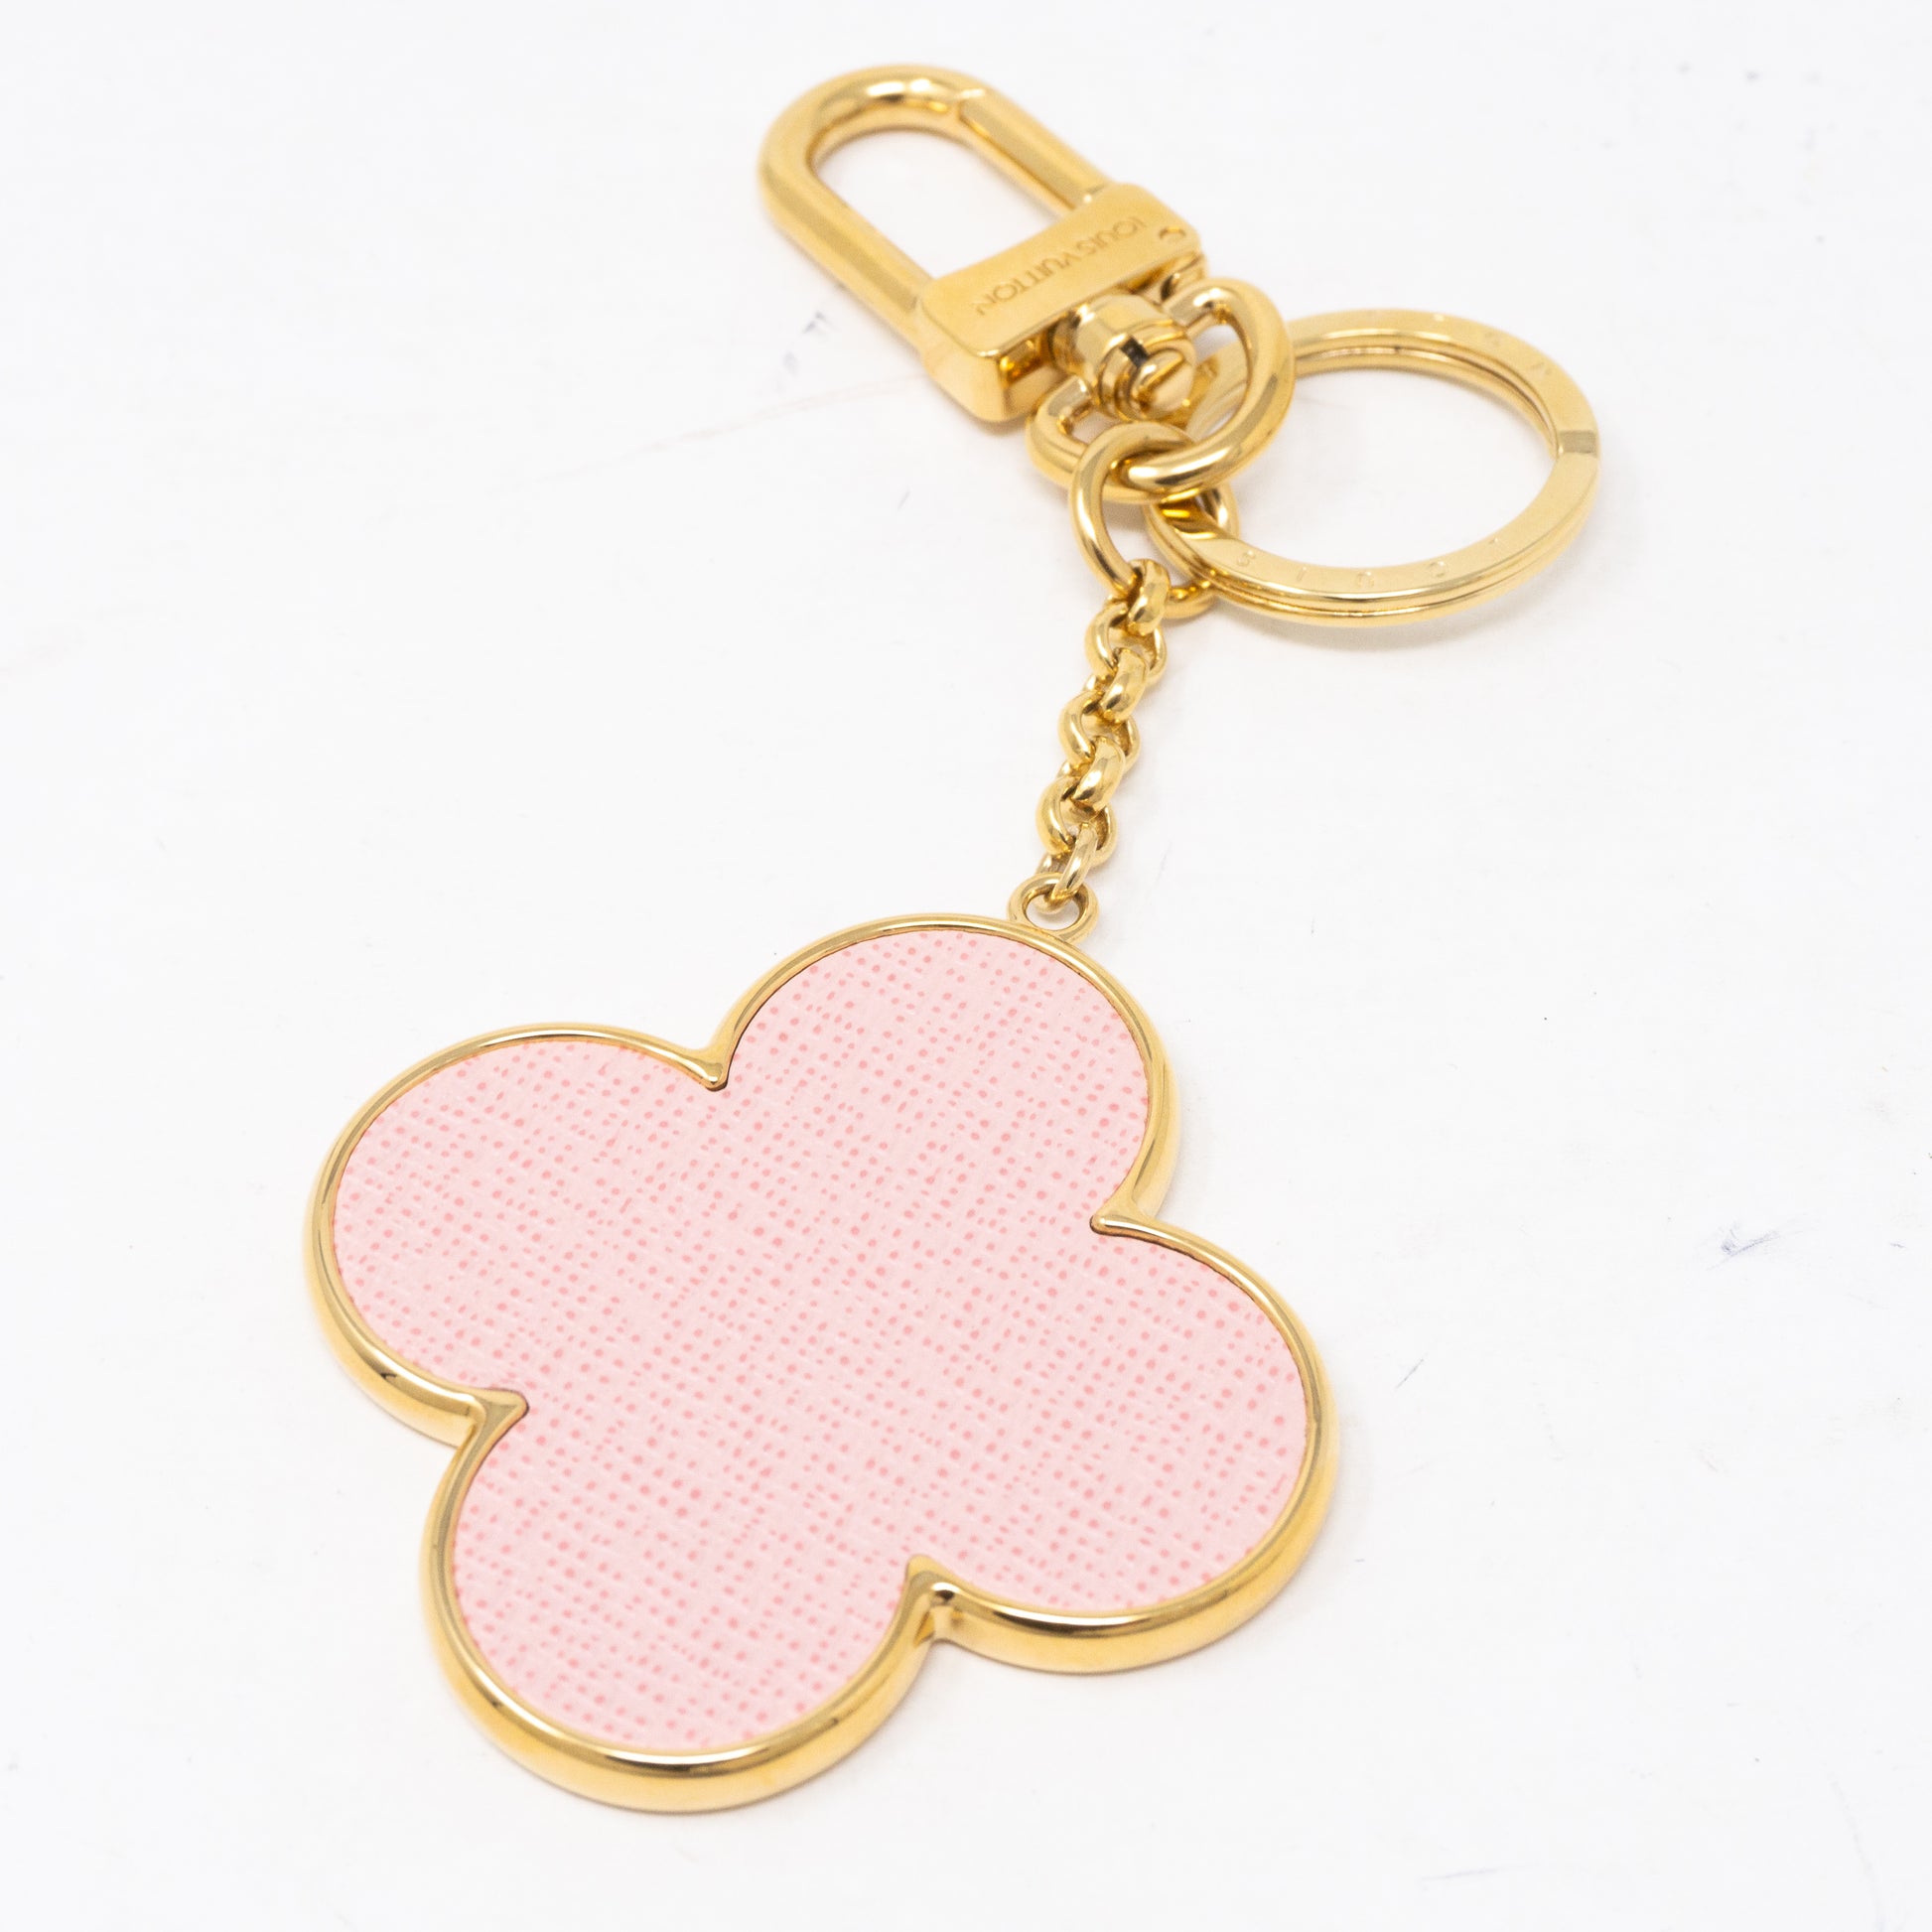 Louis Vuitton Style Lock, Key and Flower Charms Keychain/Bag Charm